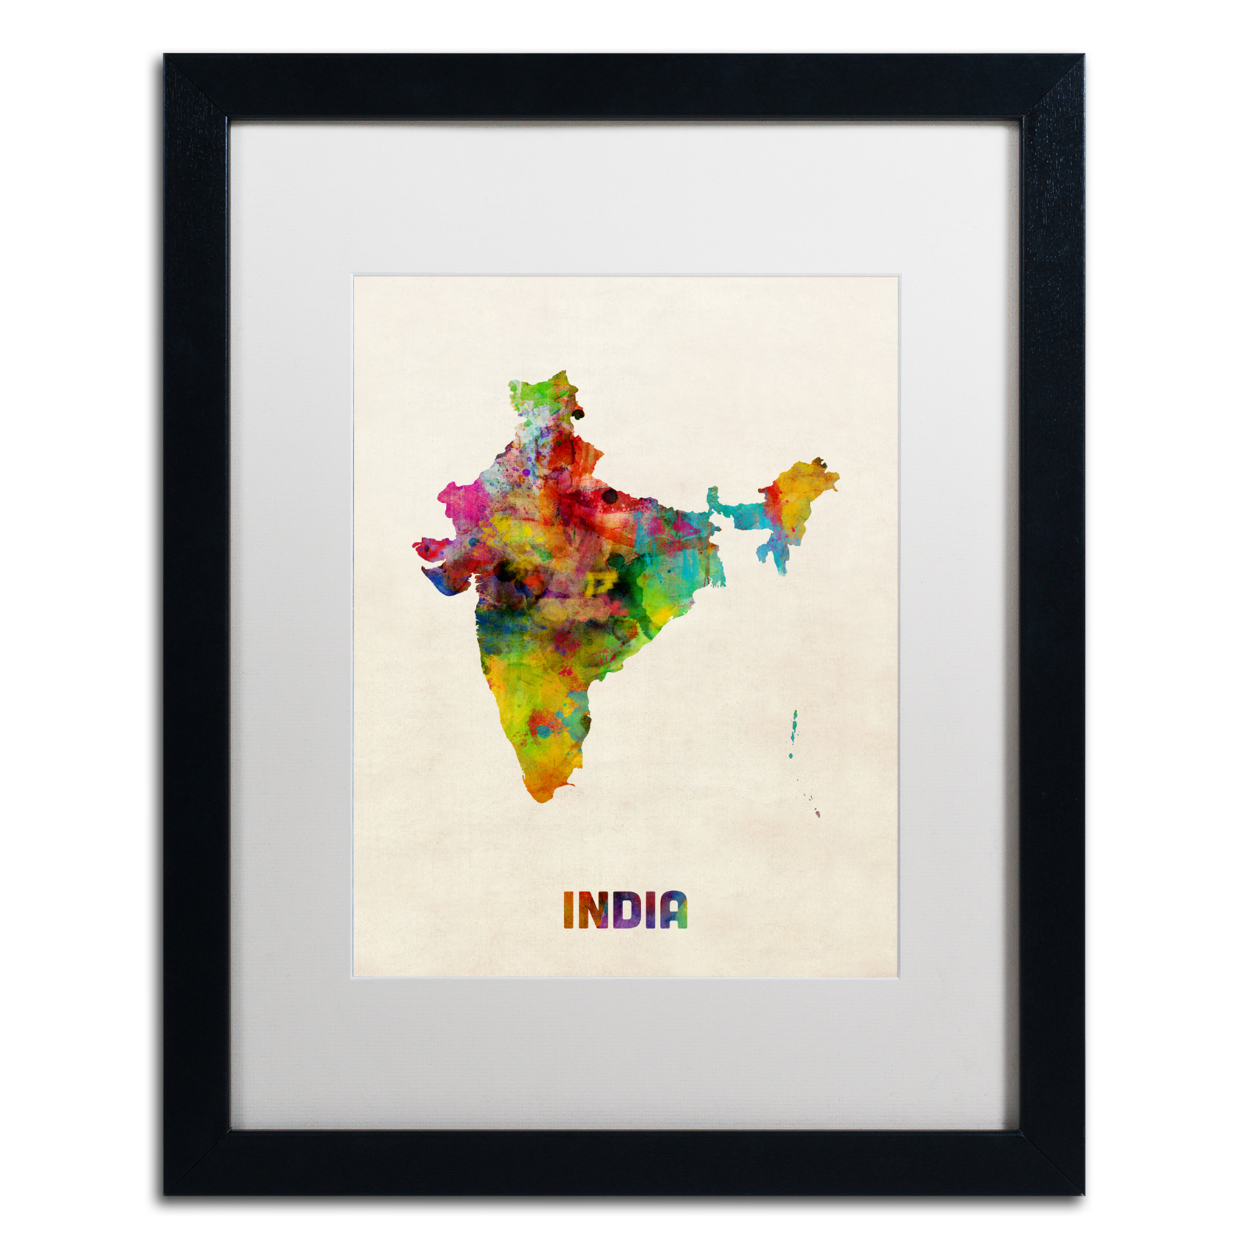 Michael Tompsett 'India Watercolor Map' Black Wooden Framed Art 18 X 22 Inches